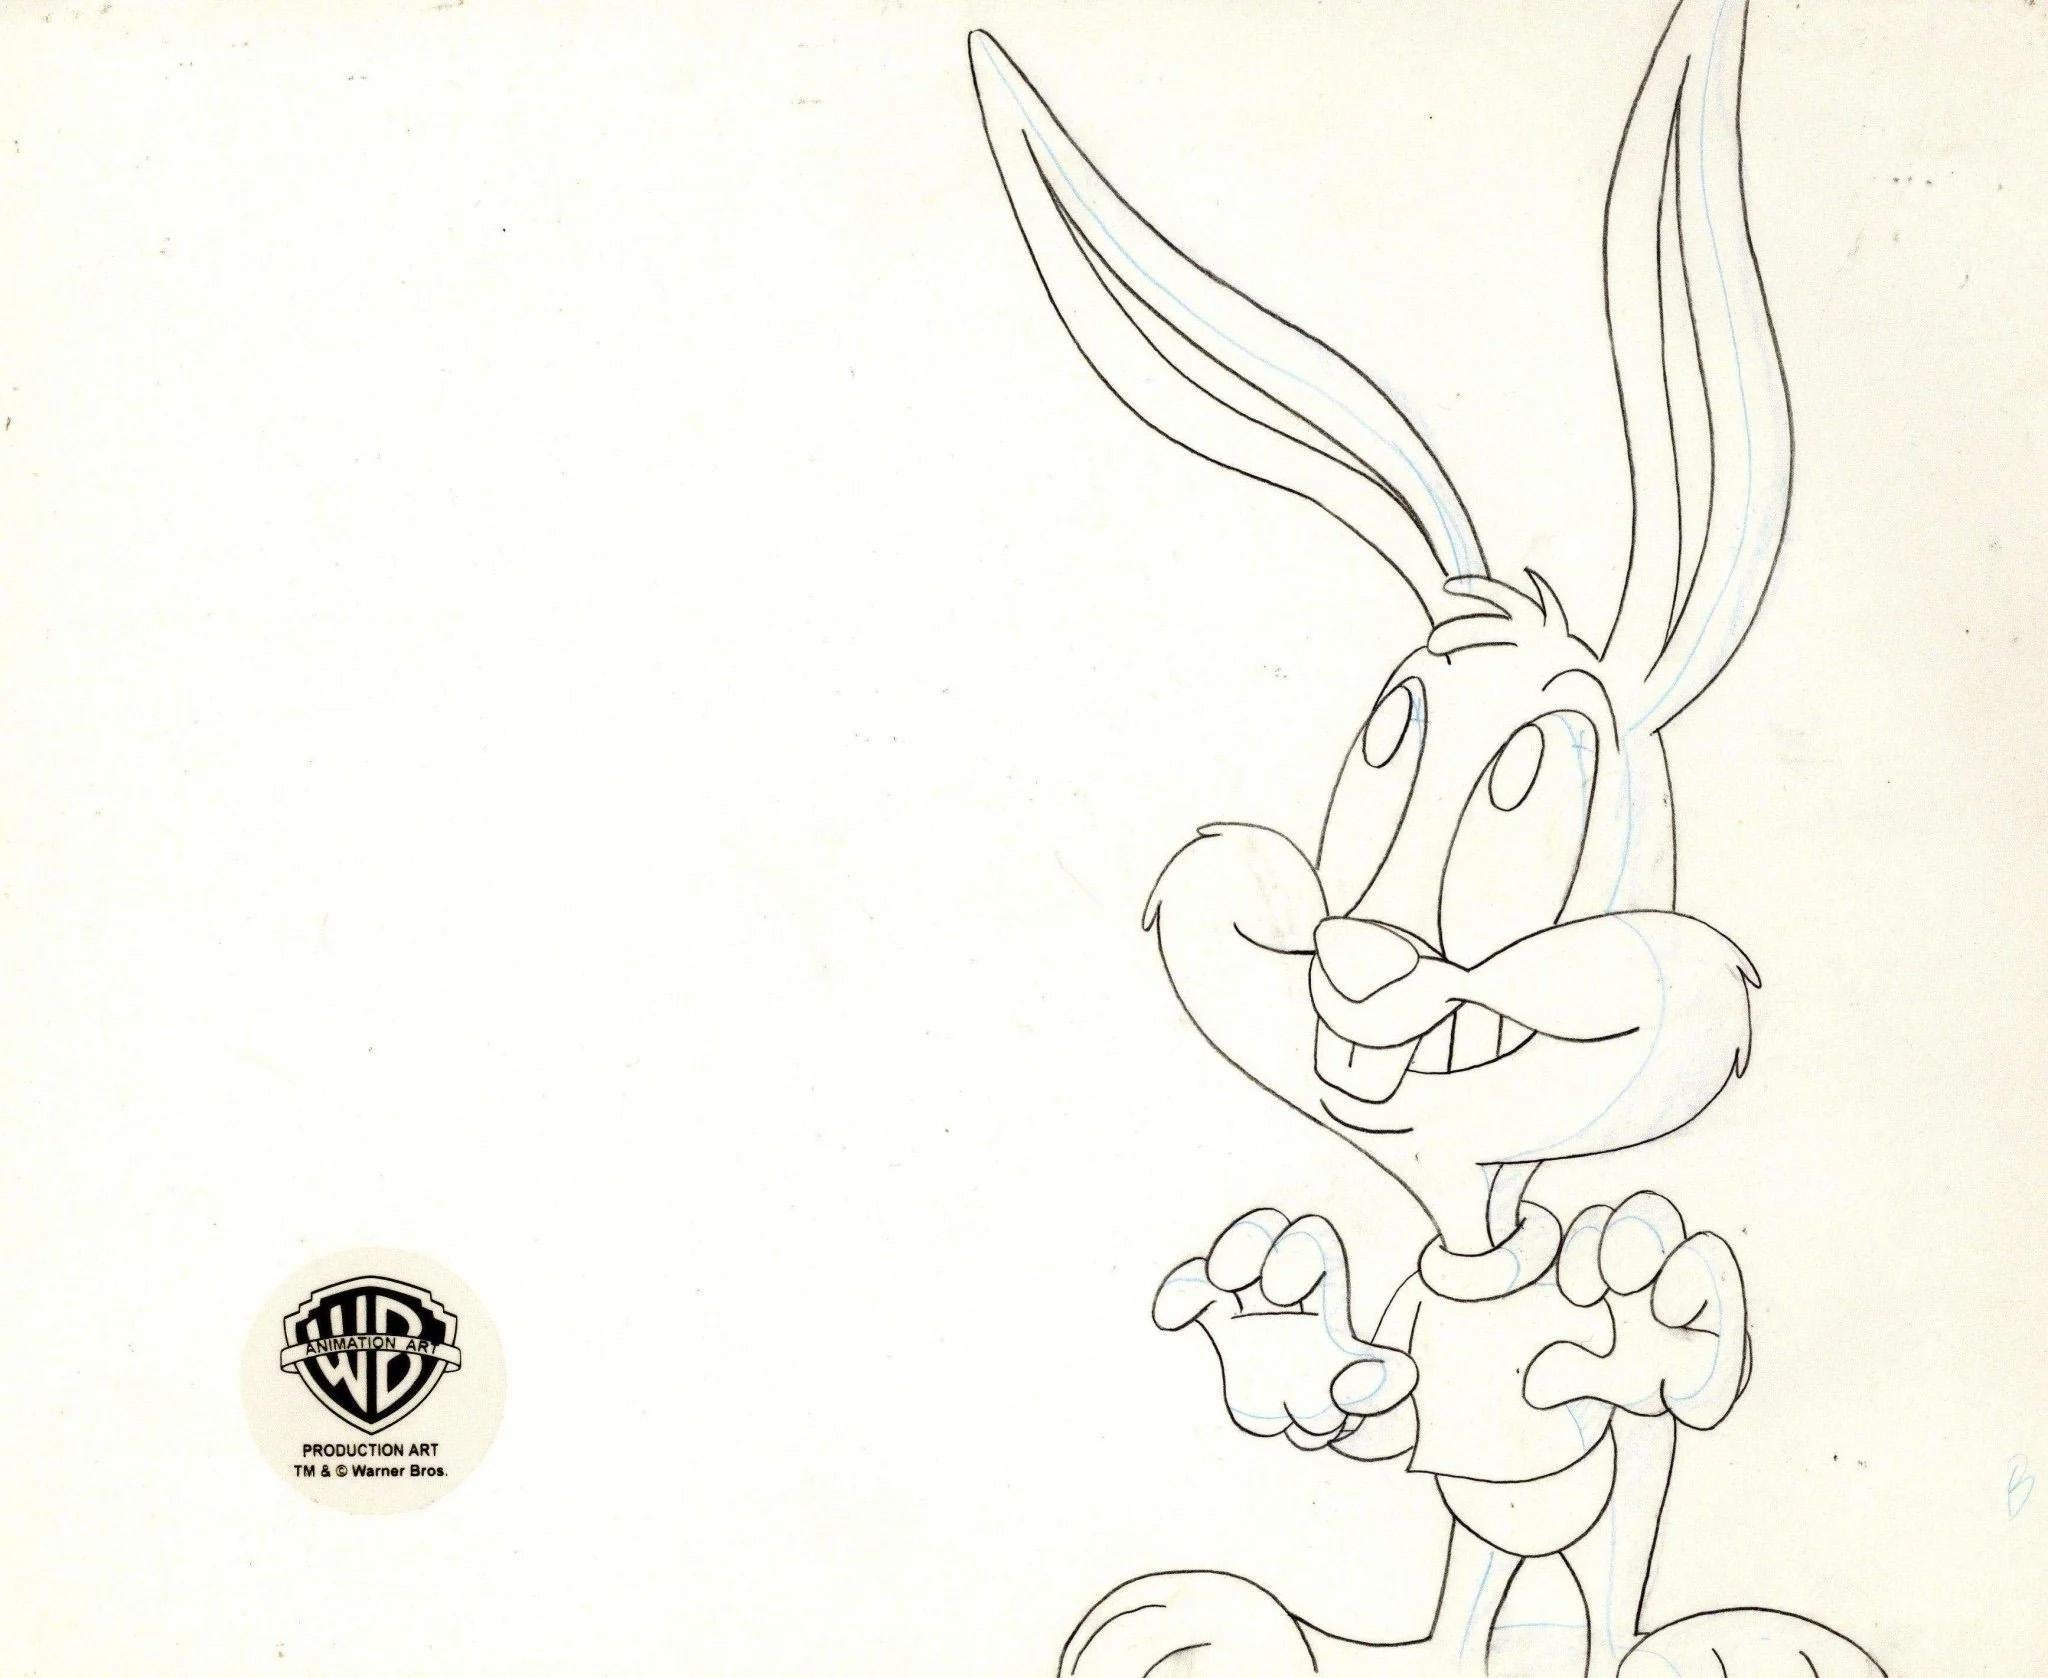 Tiny Toons Original Production Drawing: Buster Bunny - Art by Warner Bros. Studio Artists